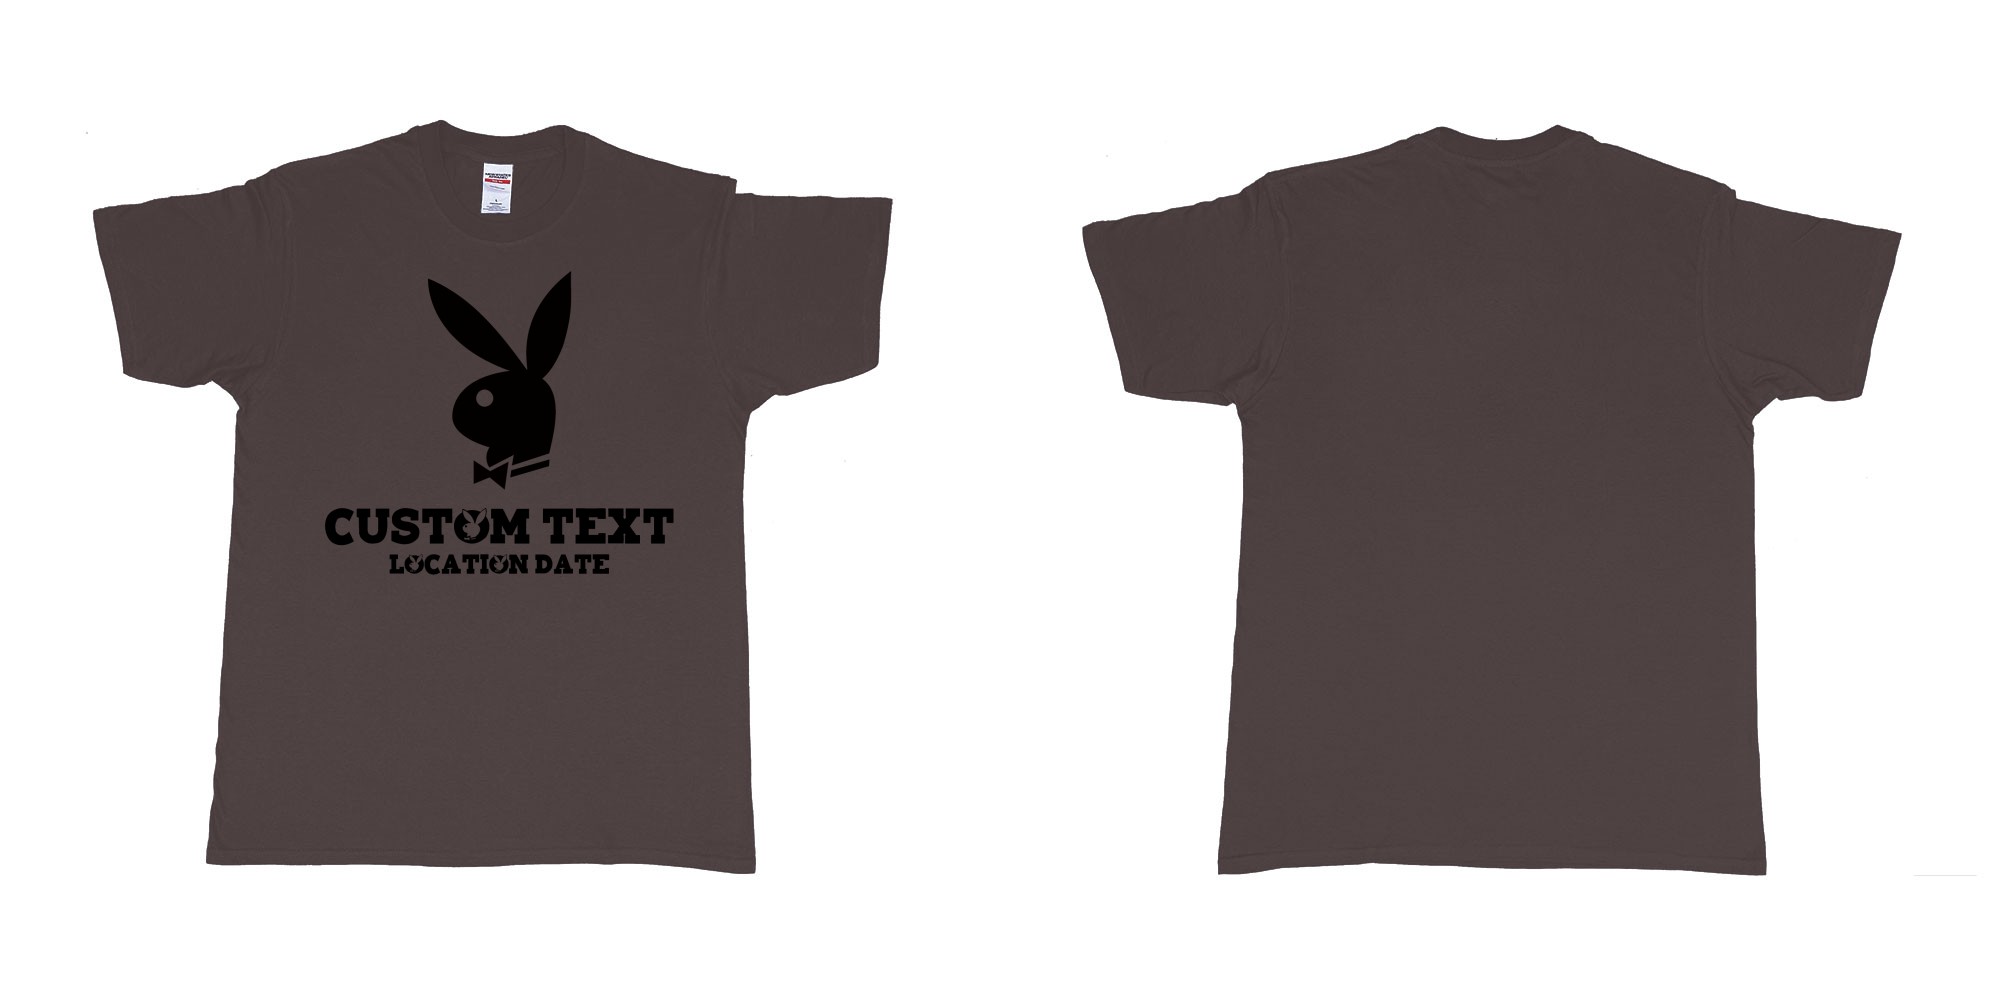 Custom tshirt design playboy playgirl custom text tshirt in fabric color dark-chocolate choice your own text made in Bali by The Pirate Way